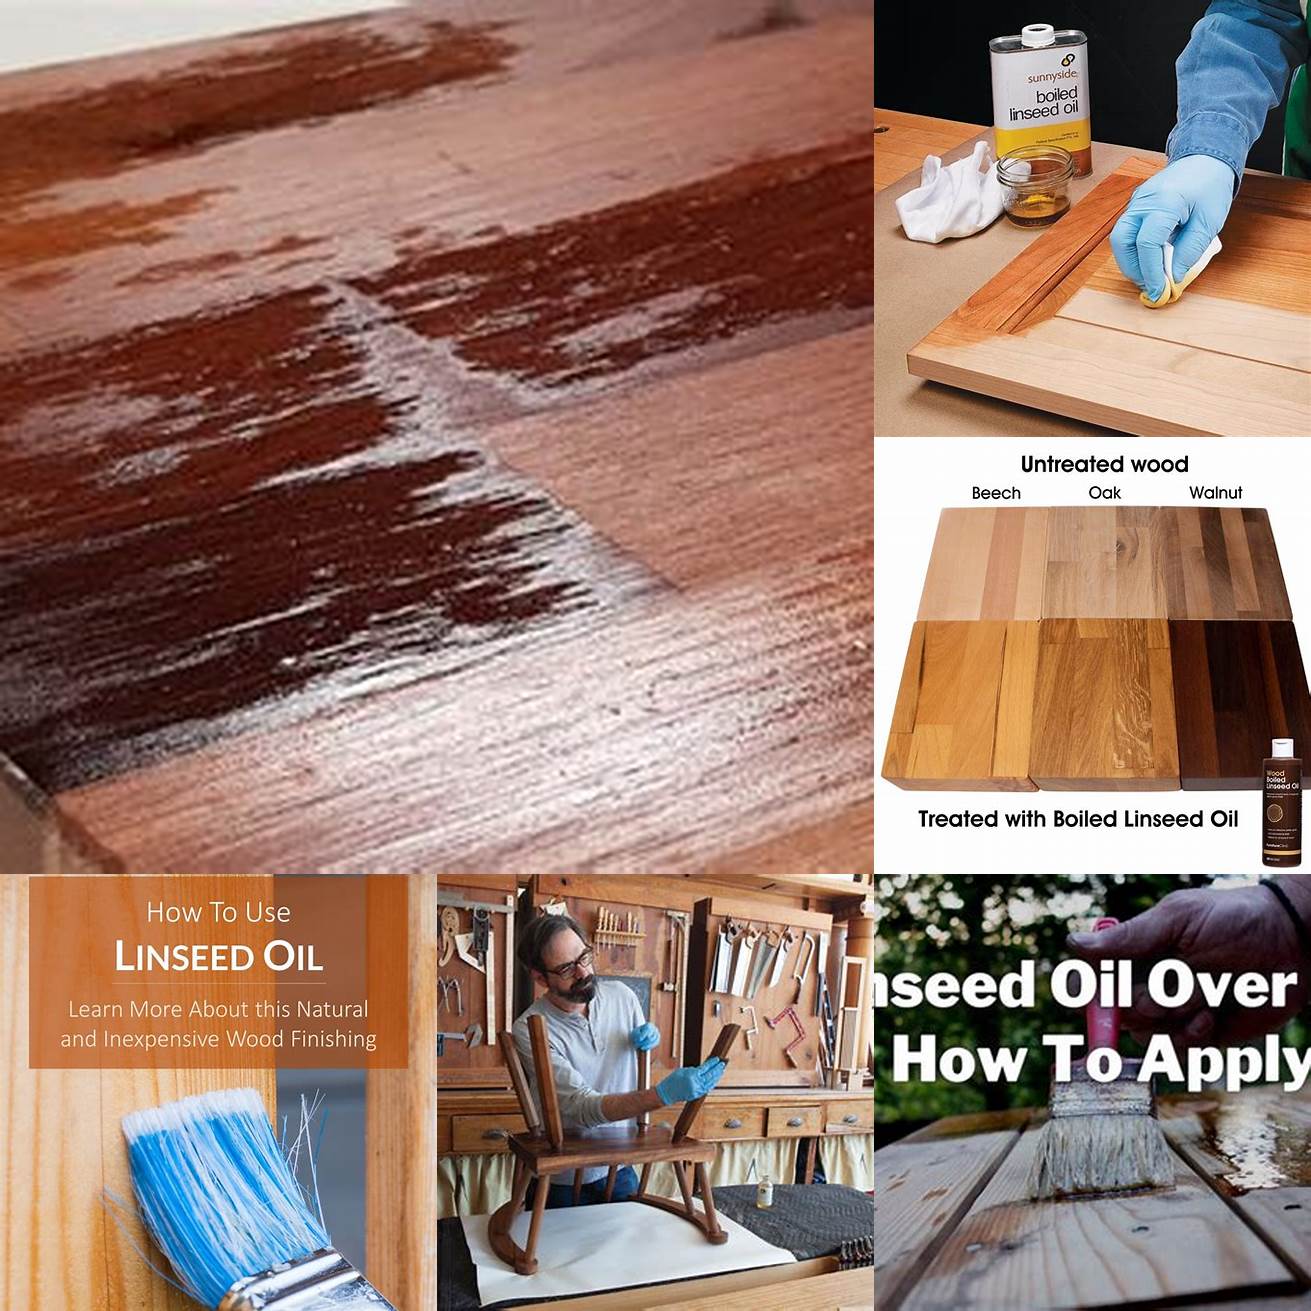 Applying the Linseed Oil